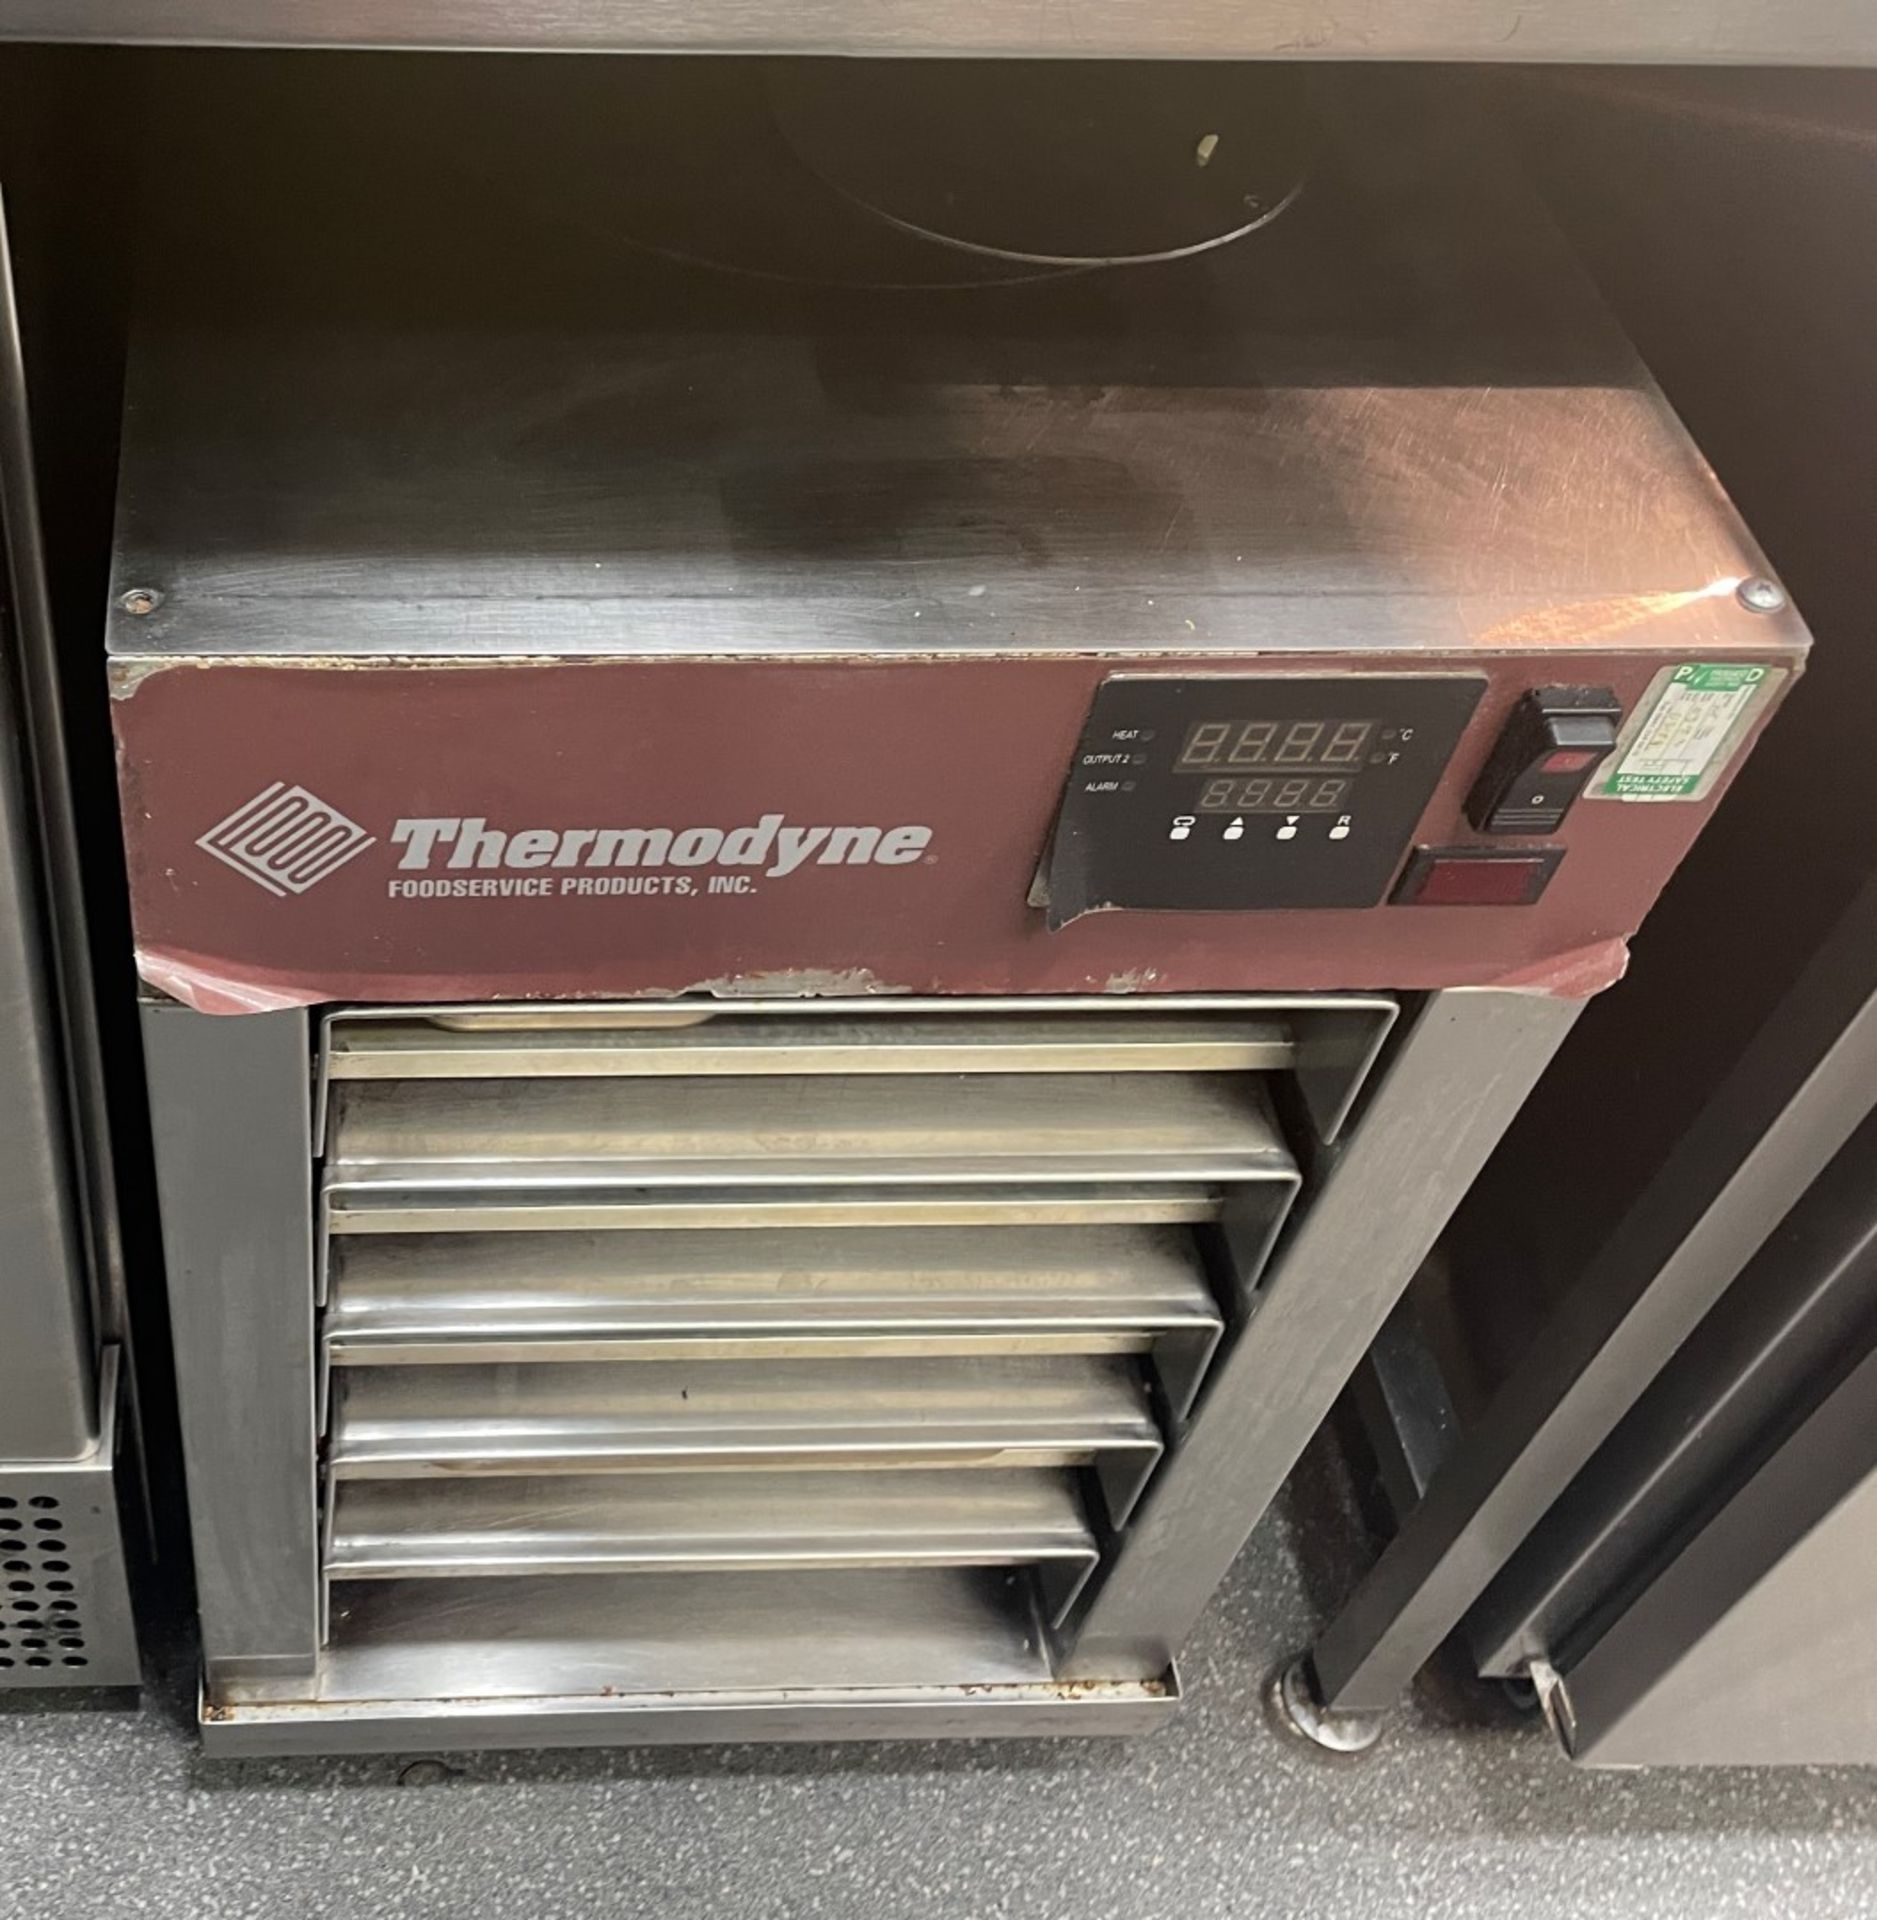 1 x -Thermodyne Counter-Top Slow Cook and Hold Oven - 240V - Image 4 of 6